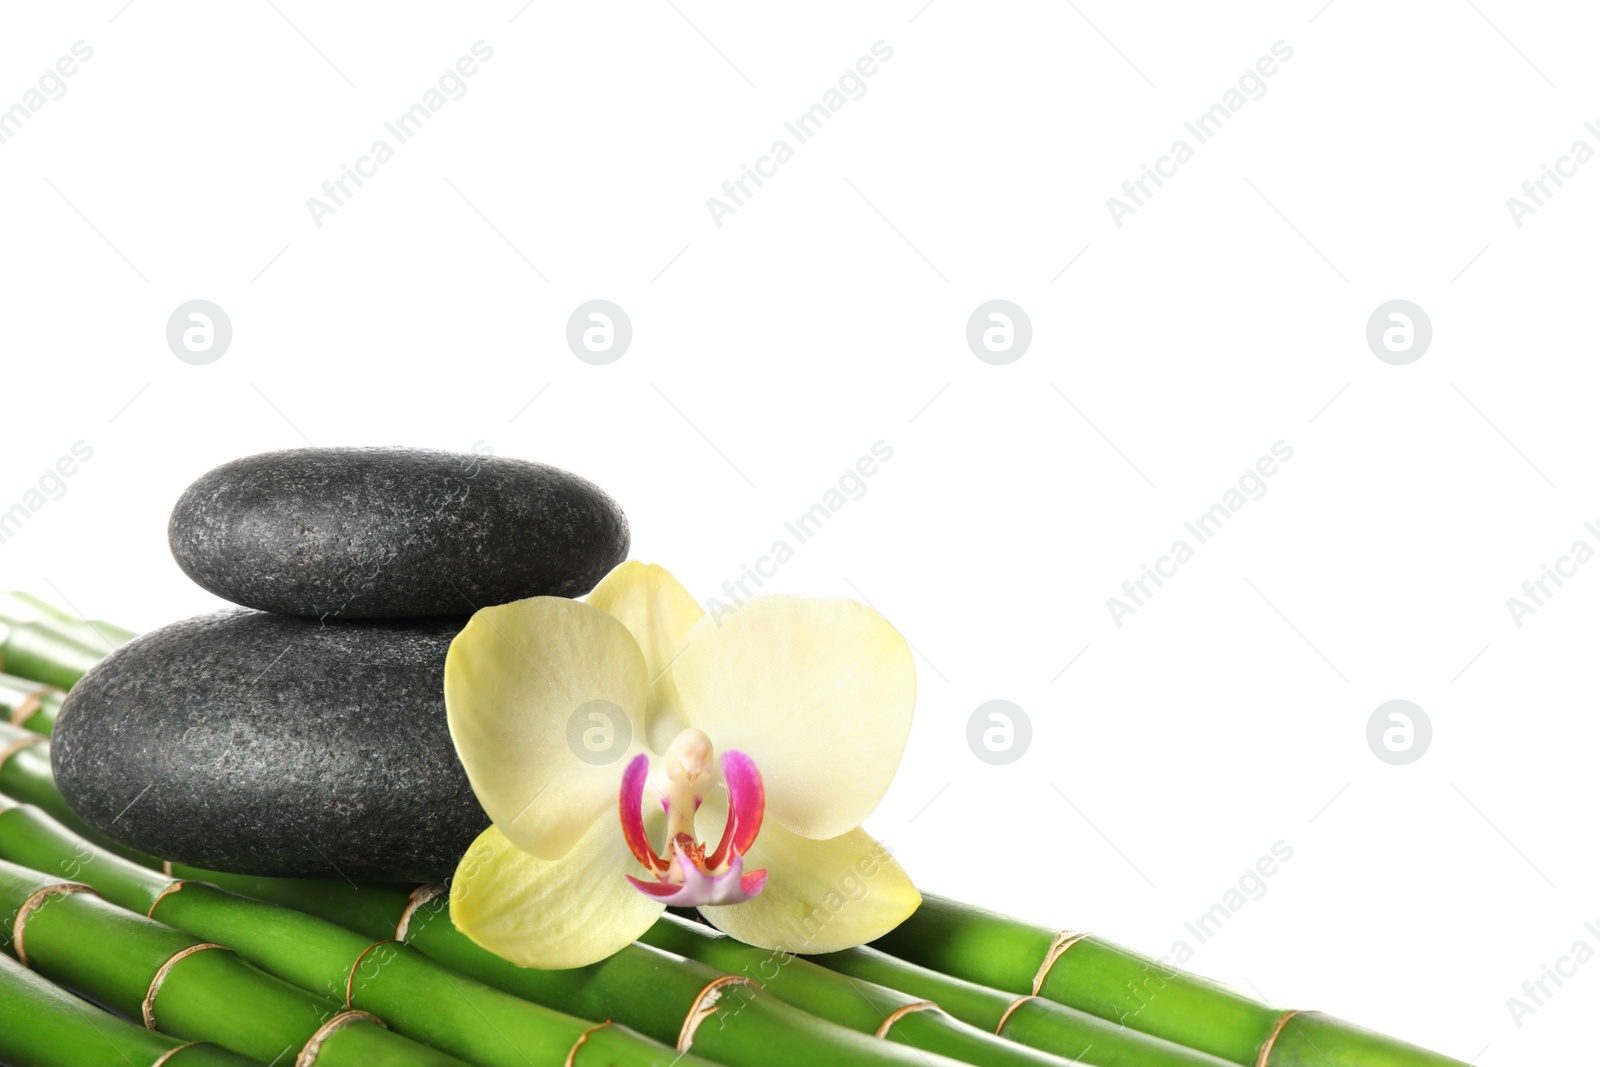 Photo of Spa stones and beautiful orchid flower on bamboo stems against white background